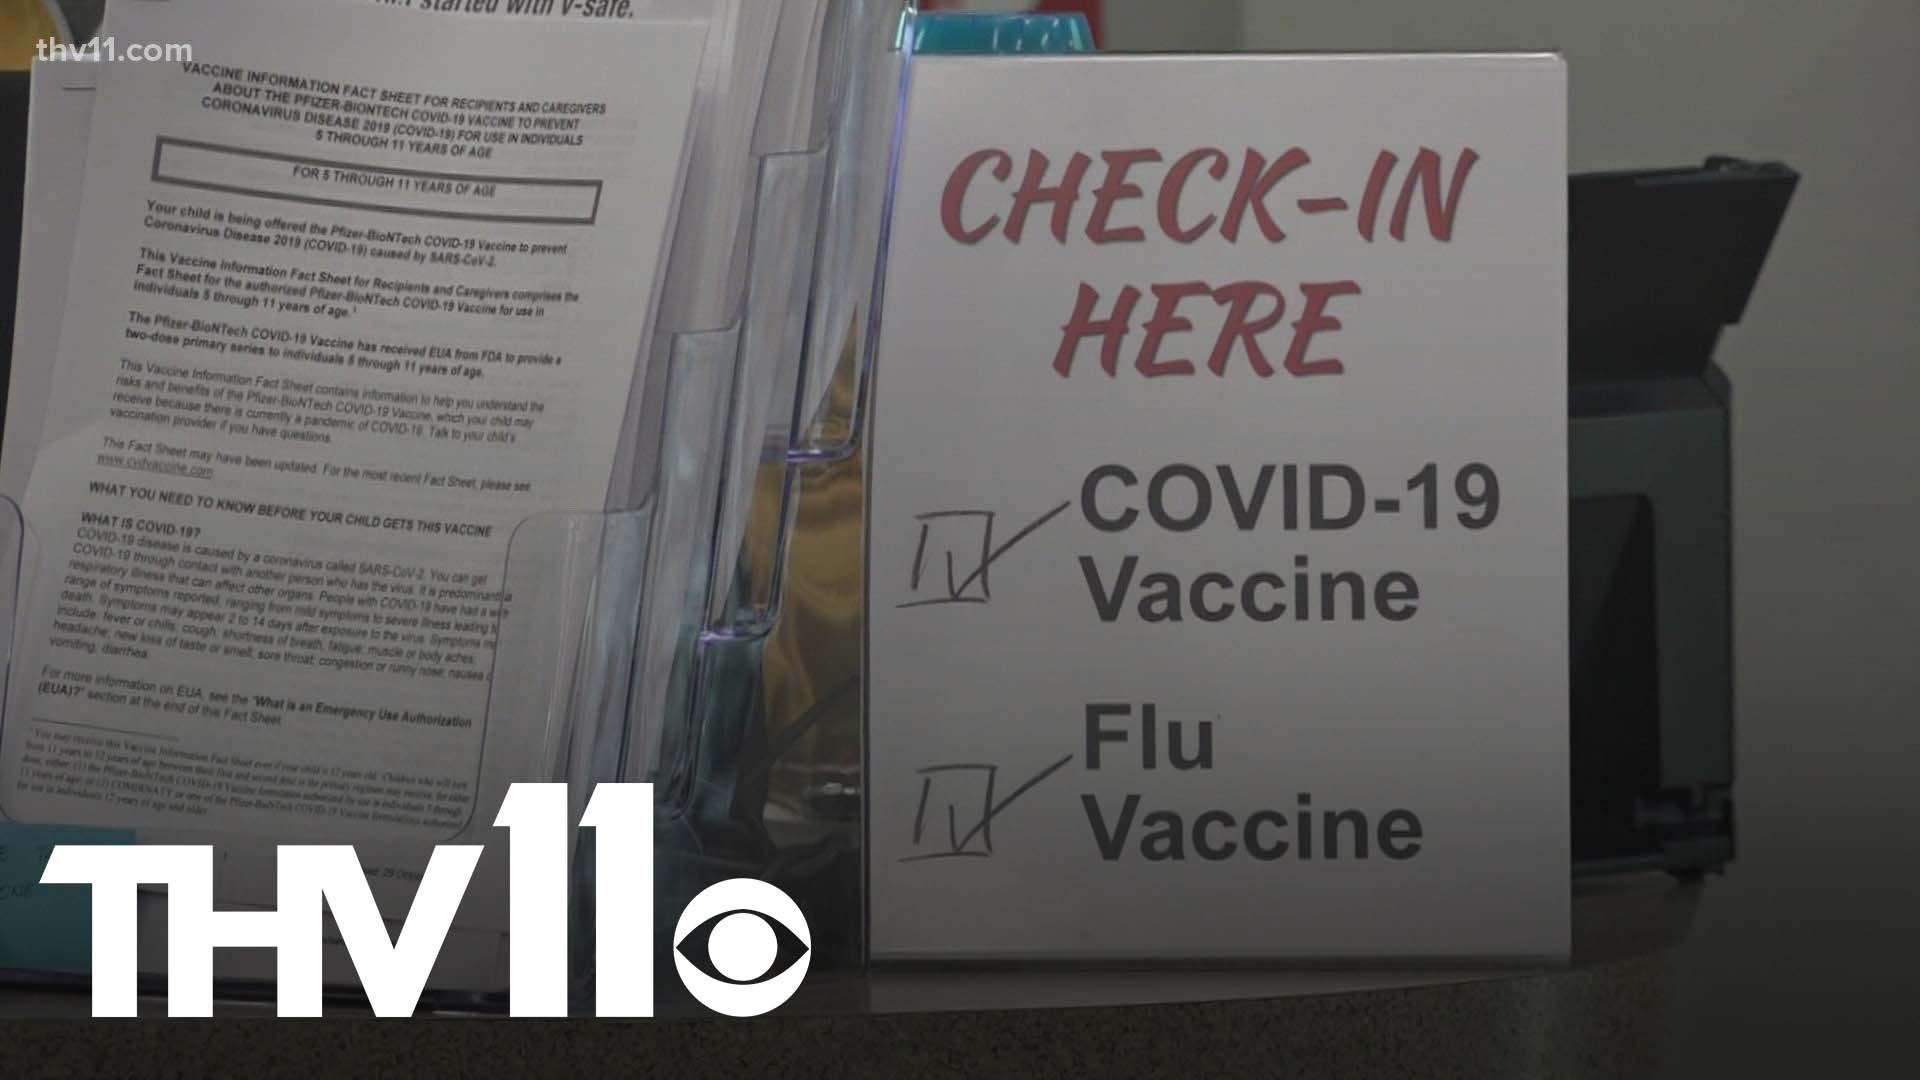 Not only are we seeing an increase of COVID cases, but flu season in Arkansas is ramping up. Some are even testing positive for both viruses at the same time.